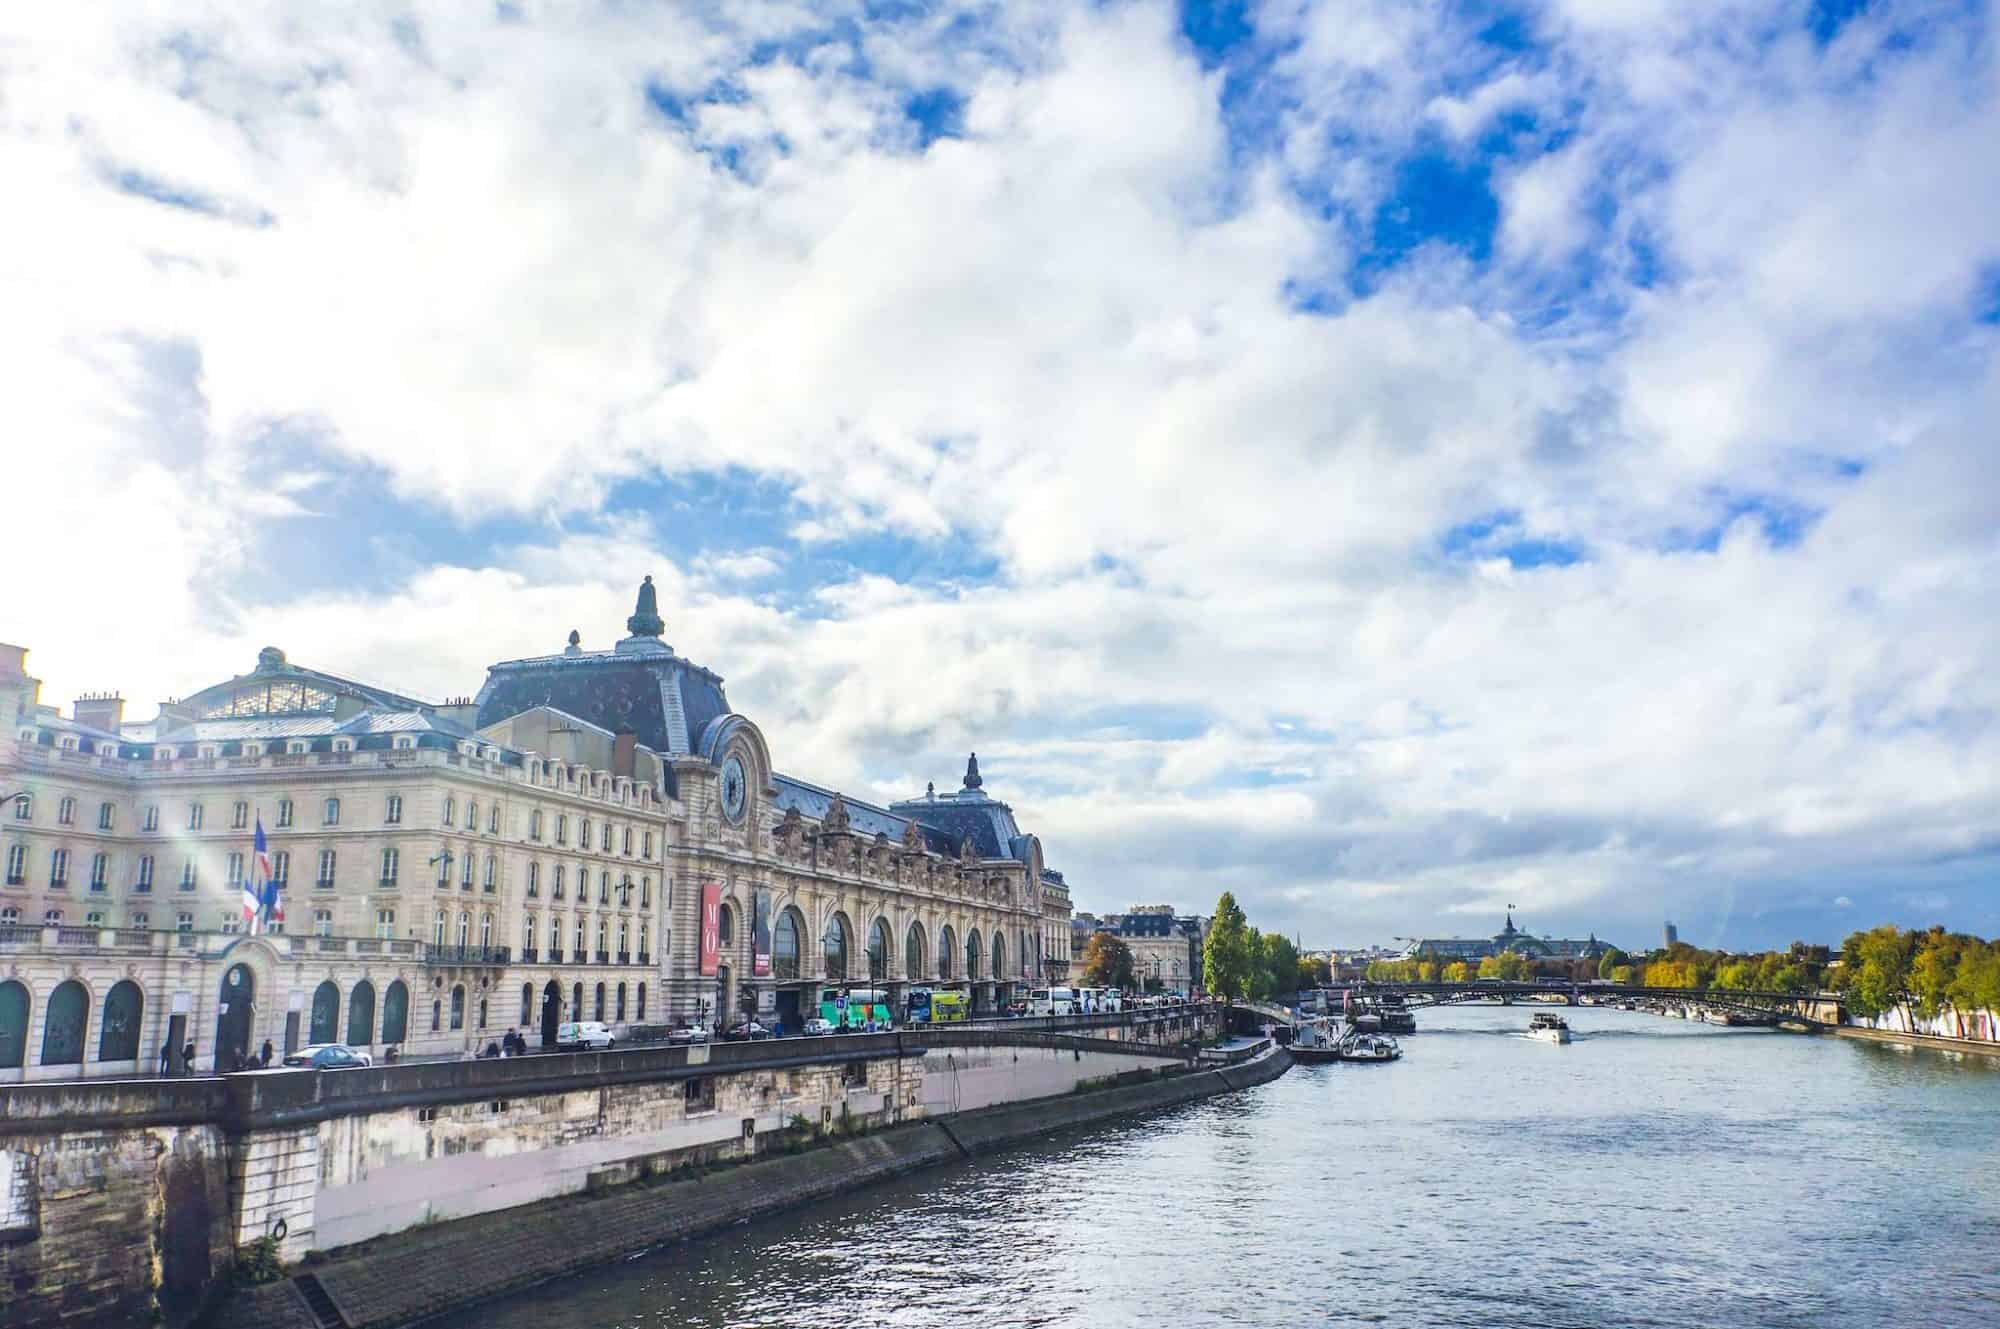 The outside of the D'Orsay Museum, on the Seine river in Paris. The sky is blue with some clouds, the sun is shining, the trees along the river are green. There is a boat going down the river.